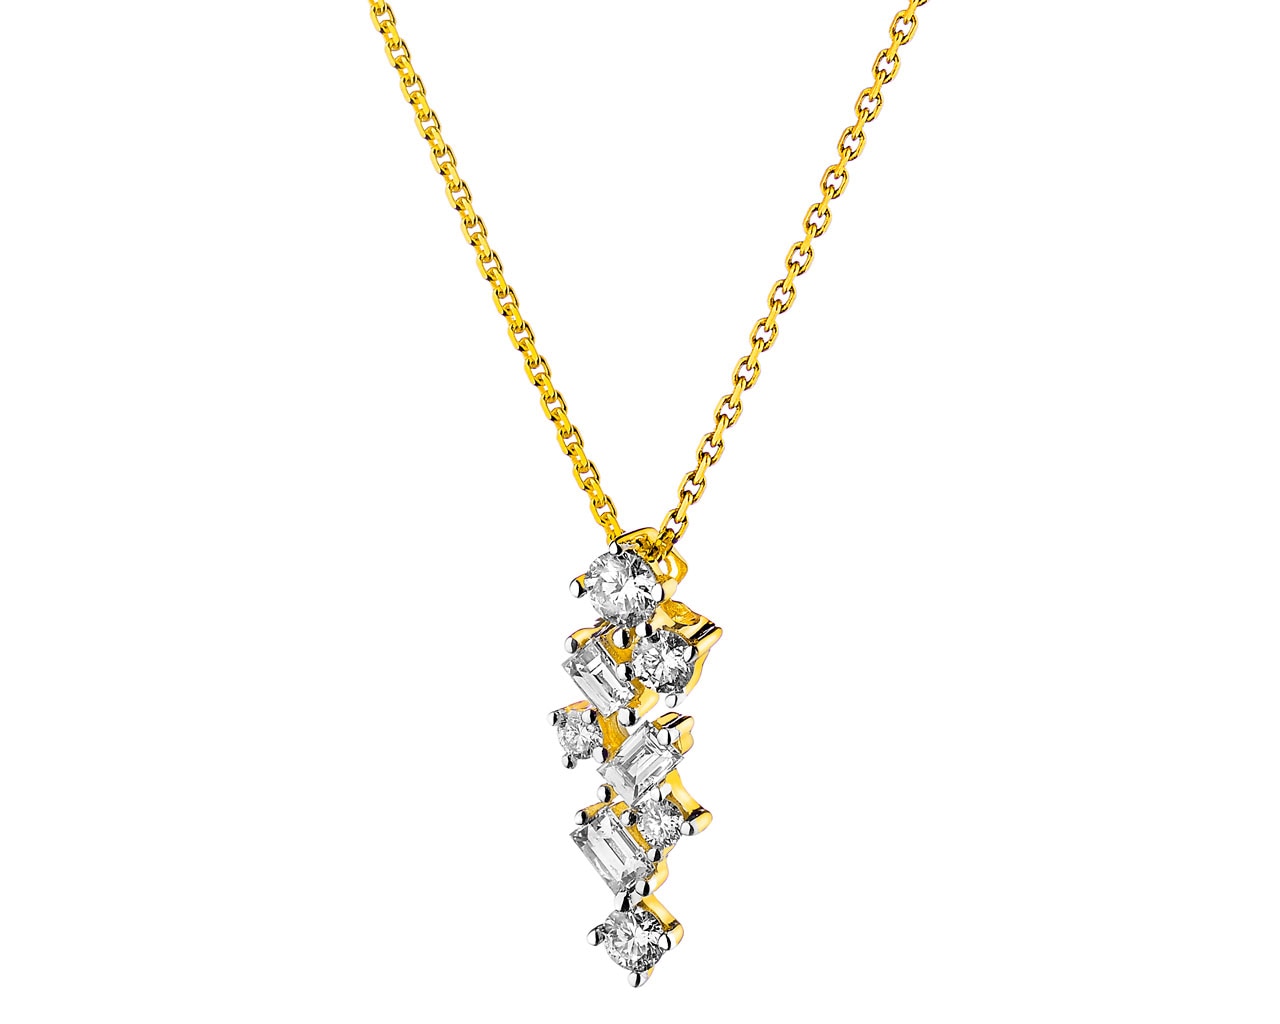 14 K Rhodium-Plated Yellow Gold Necklace with Diamonds 0,25 ct - fineness 14 K